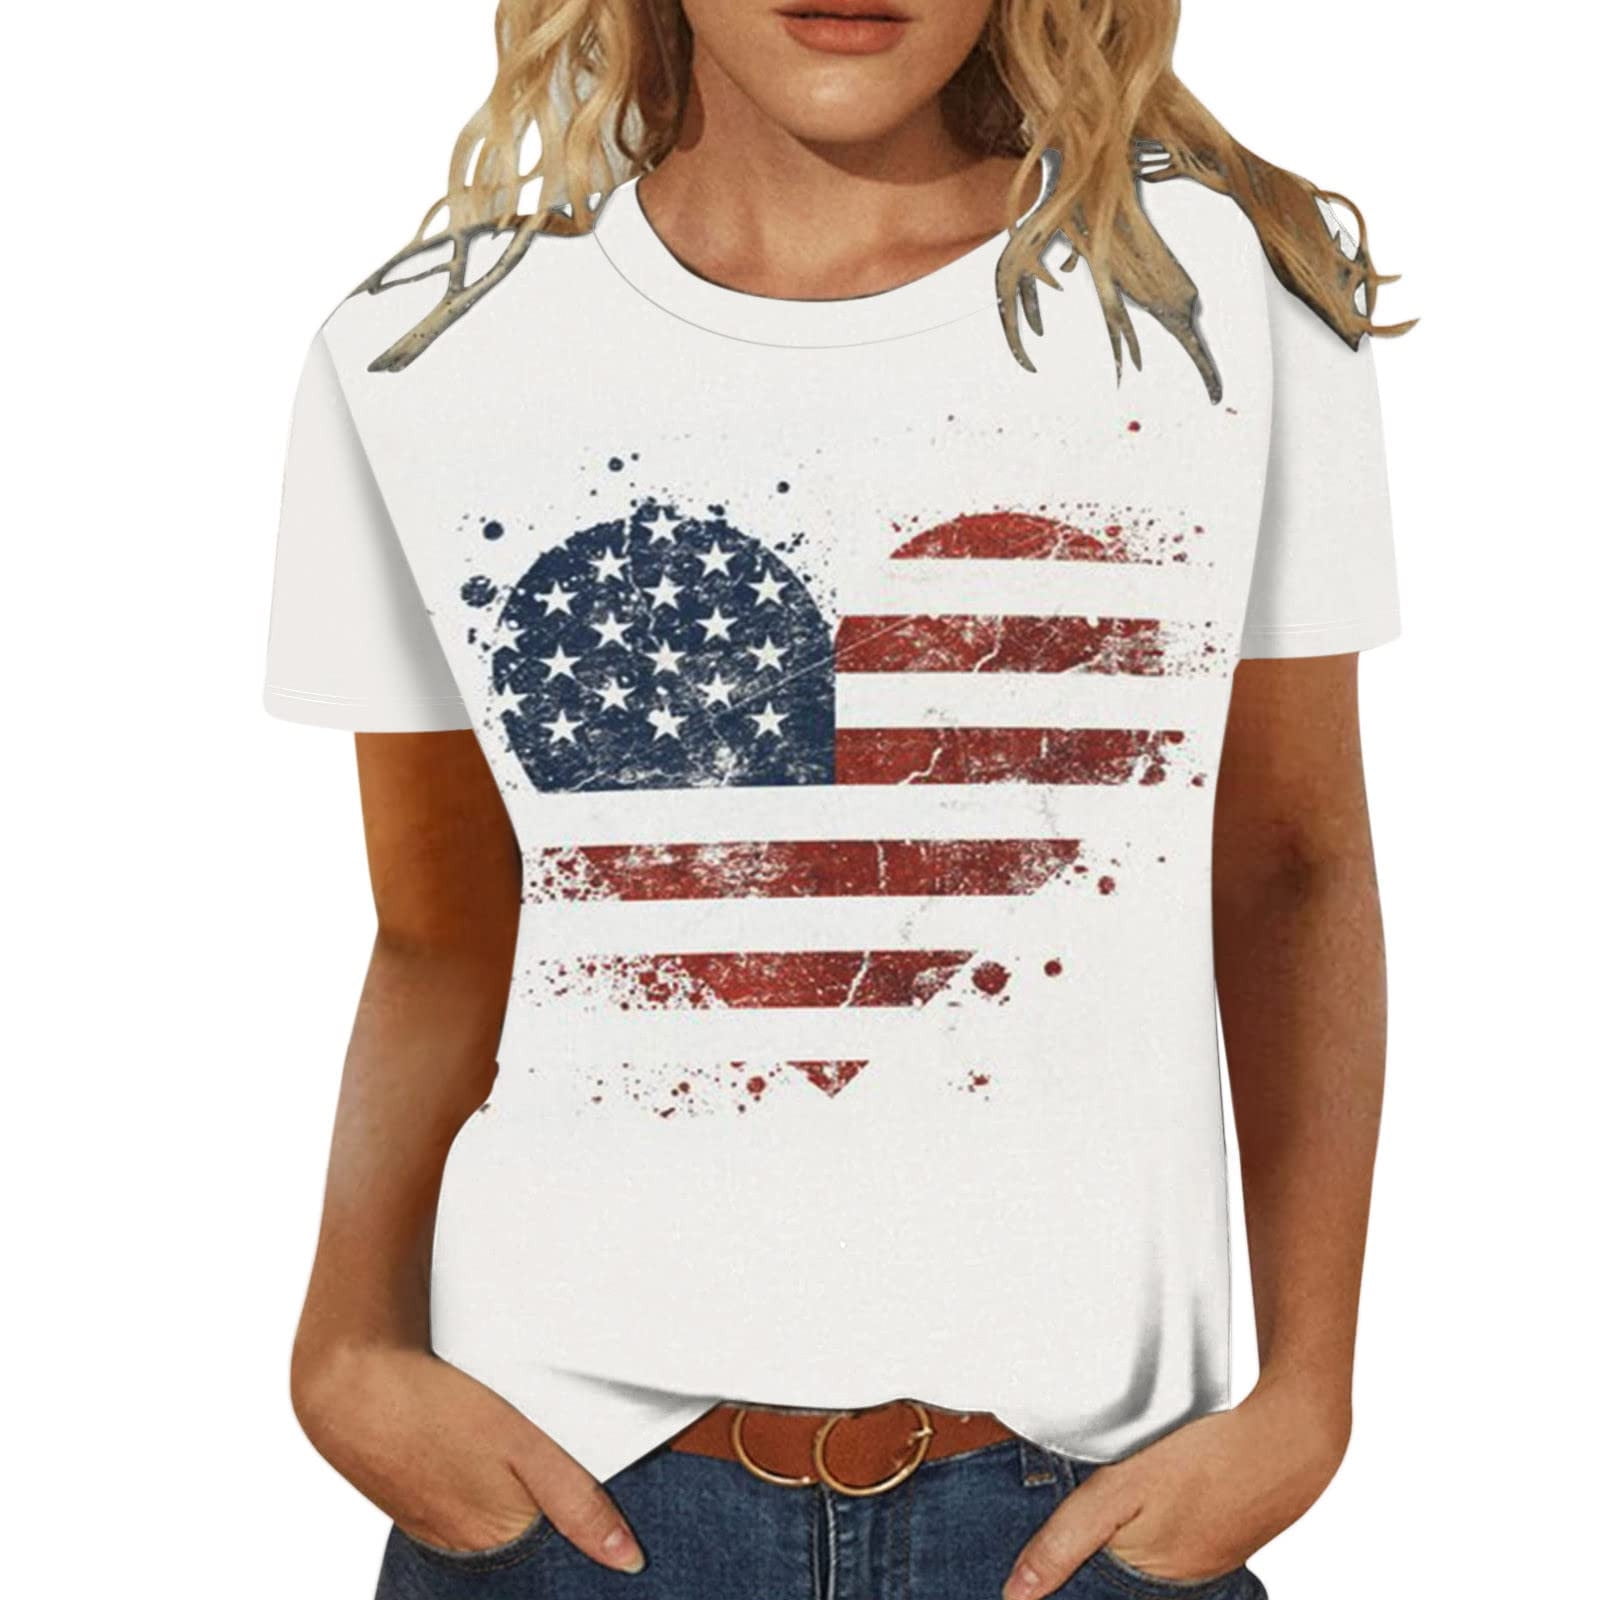 REVETRO Womens USA Short Sleeve Shirts American Flag Shirt Distressed Graphic Tee Letter Print Summer Tops 